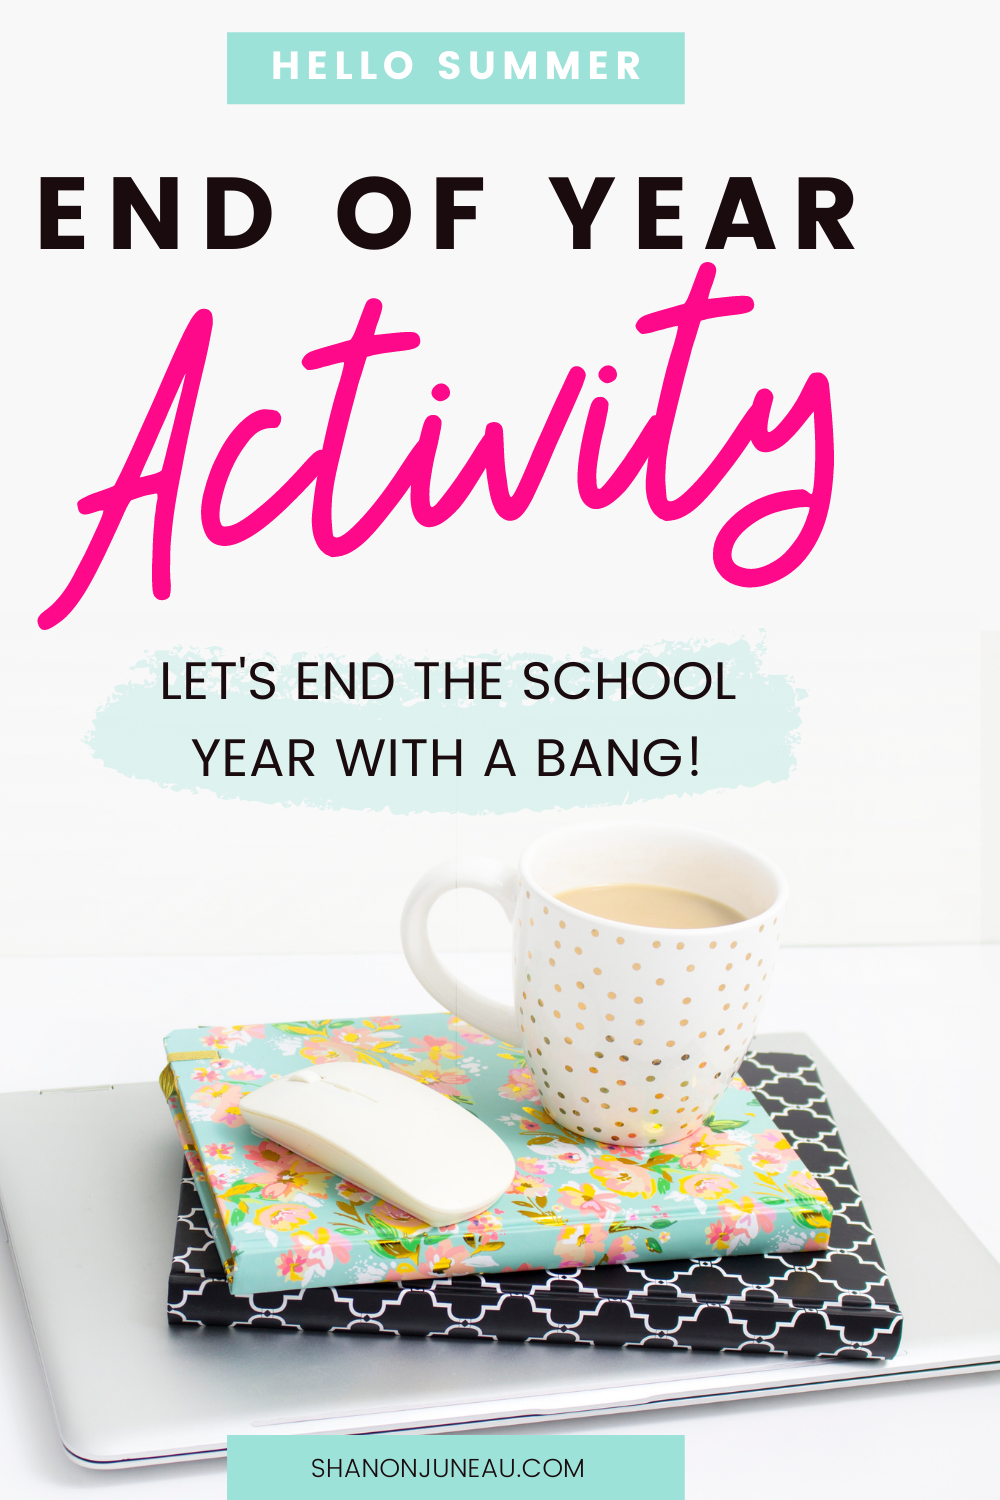 End of Year Activities